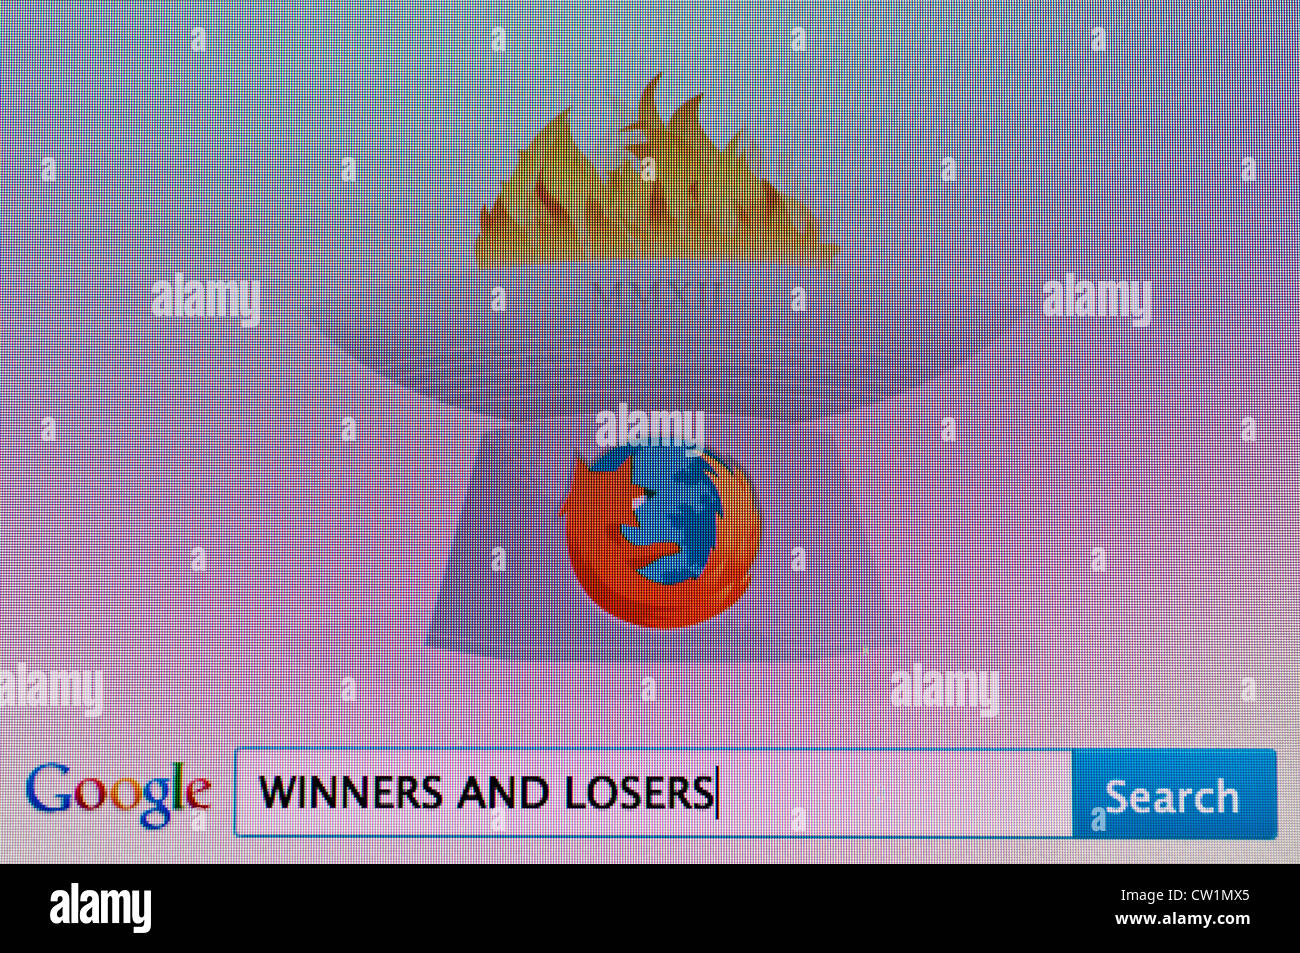 Computer screen with Google search for Winners and Losers Stock Photo